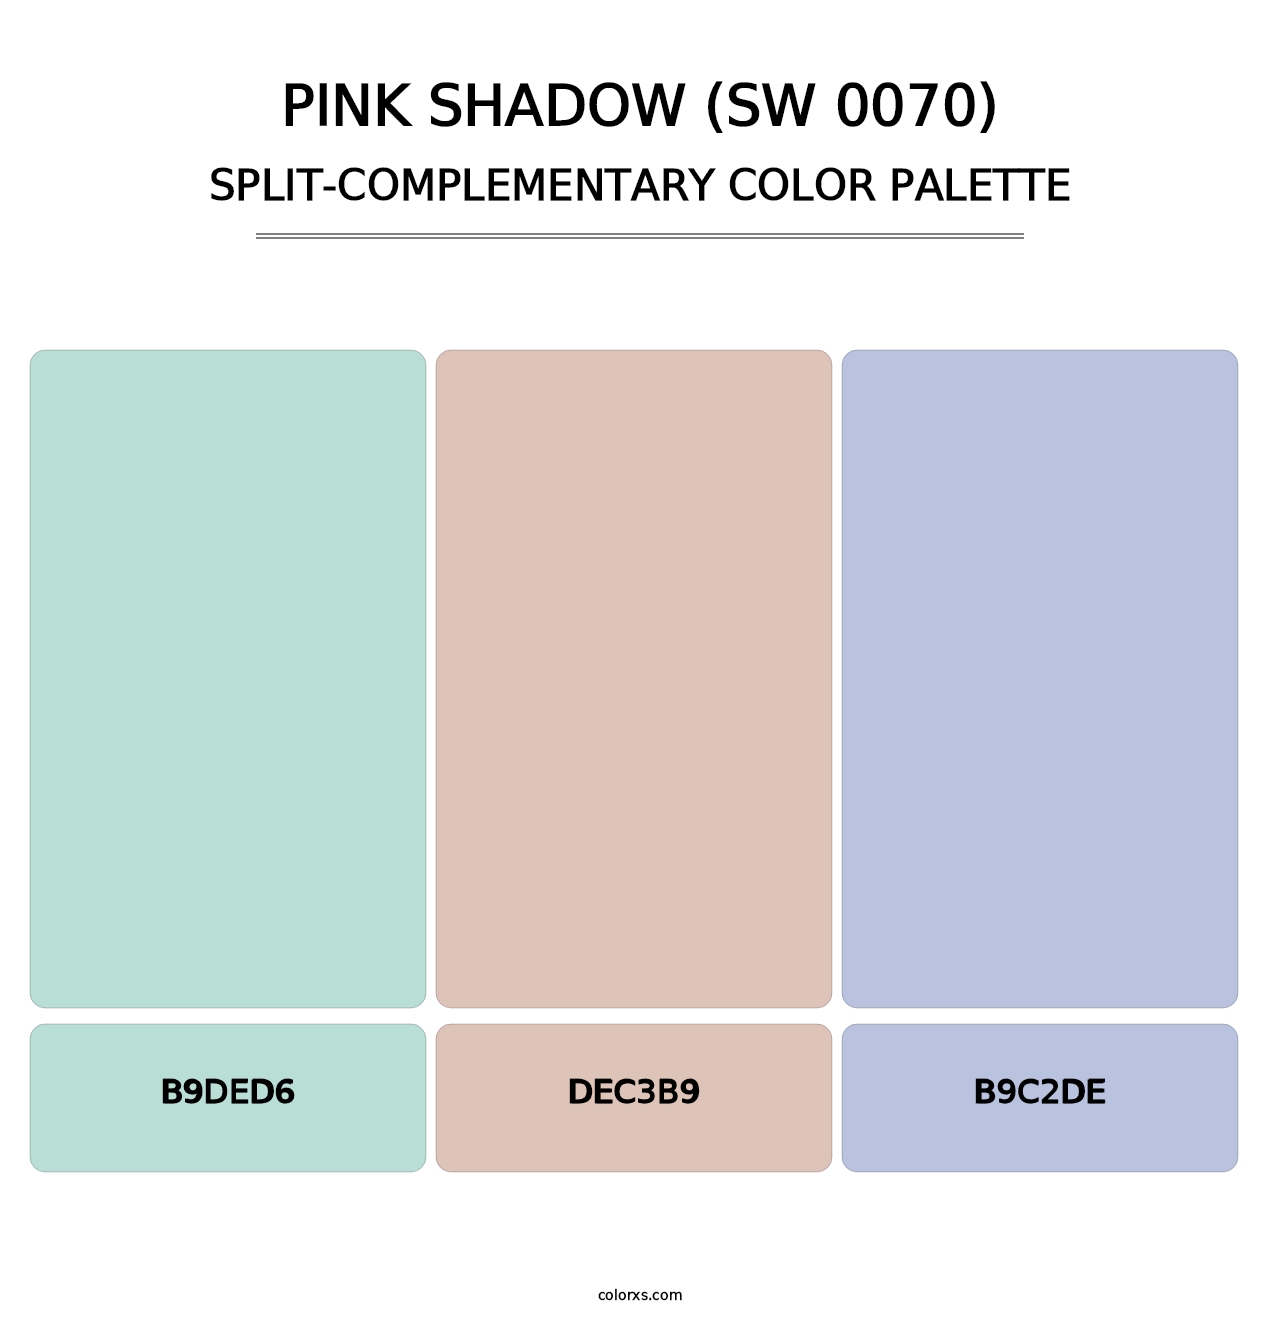 Pink Shadow (SW 0070) - Split-Complementary Color Palette